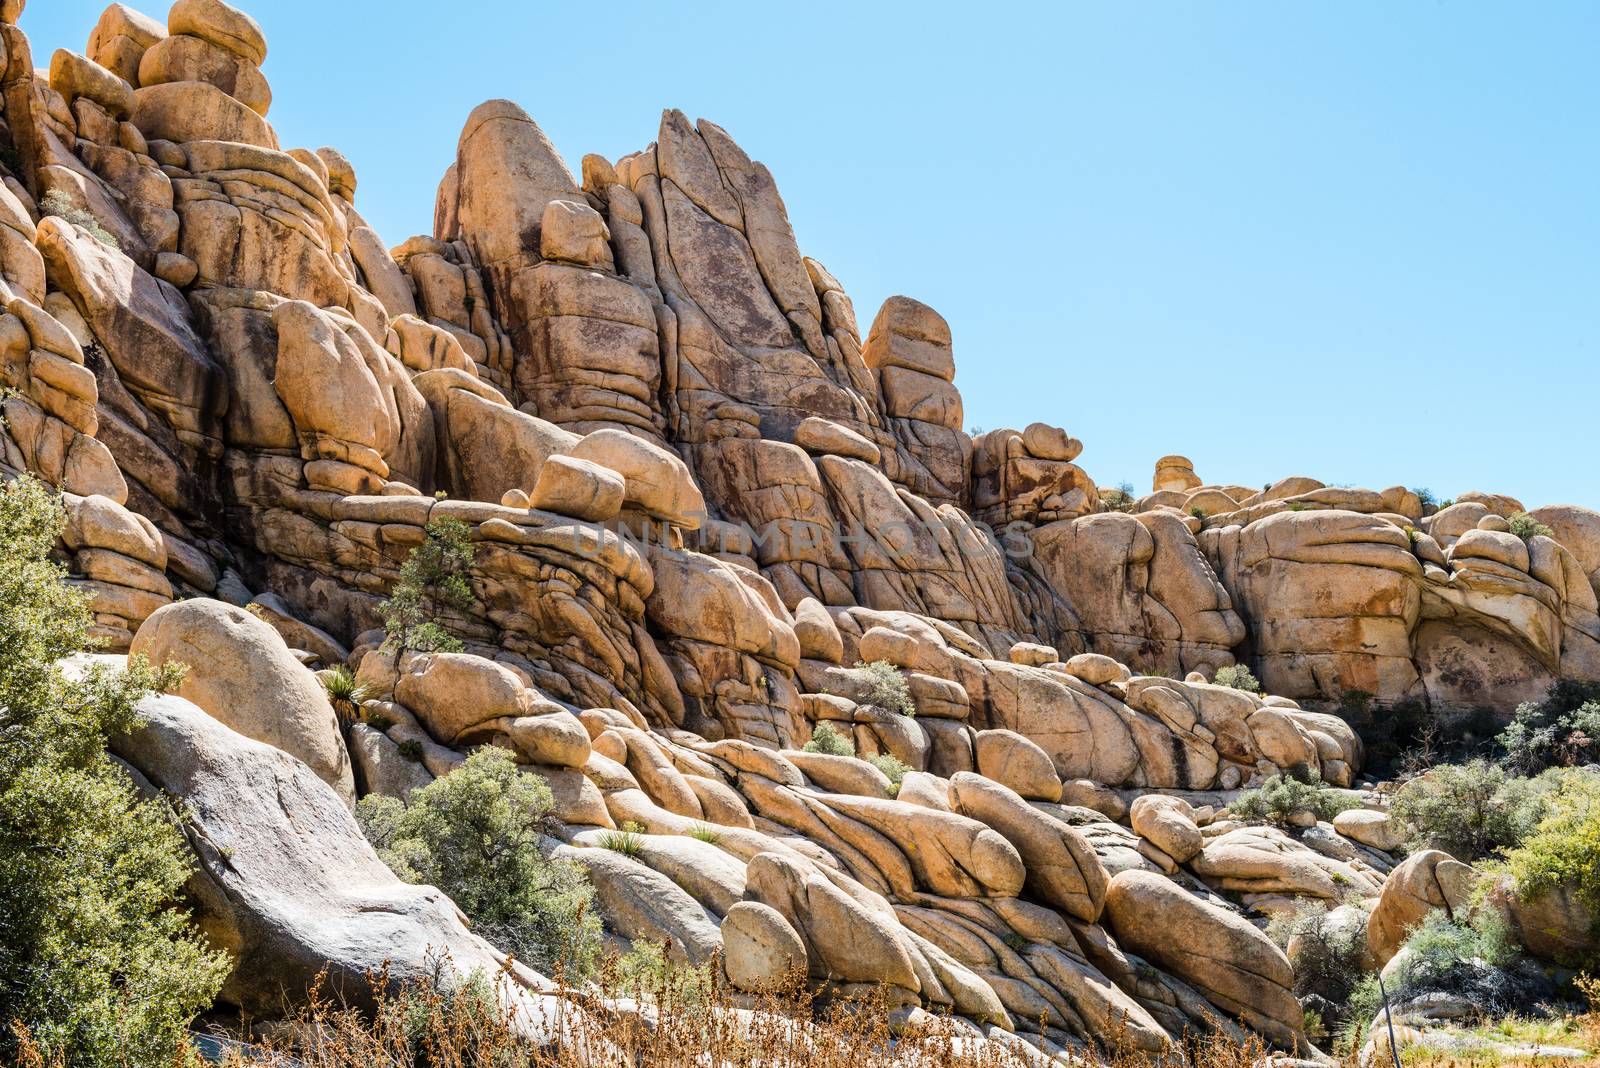 Granite boulders in the Wonderland of Rocks area along Willow Hole Trail in Joshua Tree National Park, California